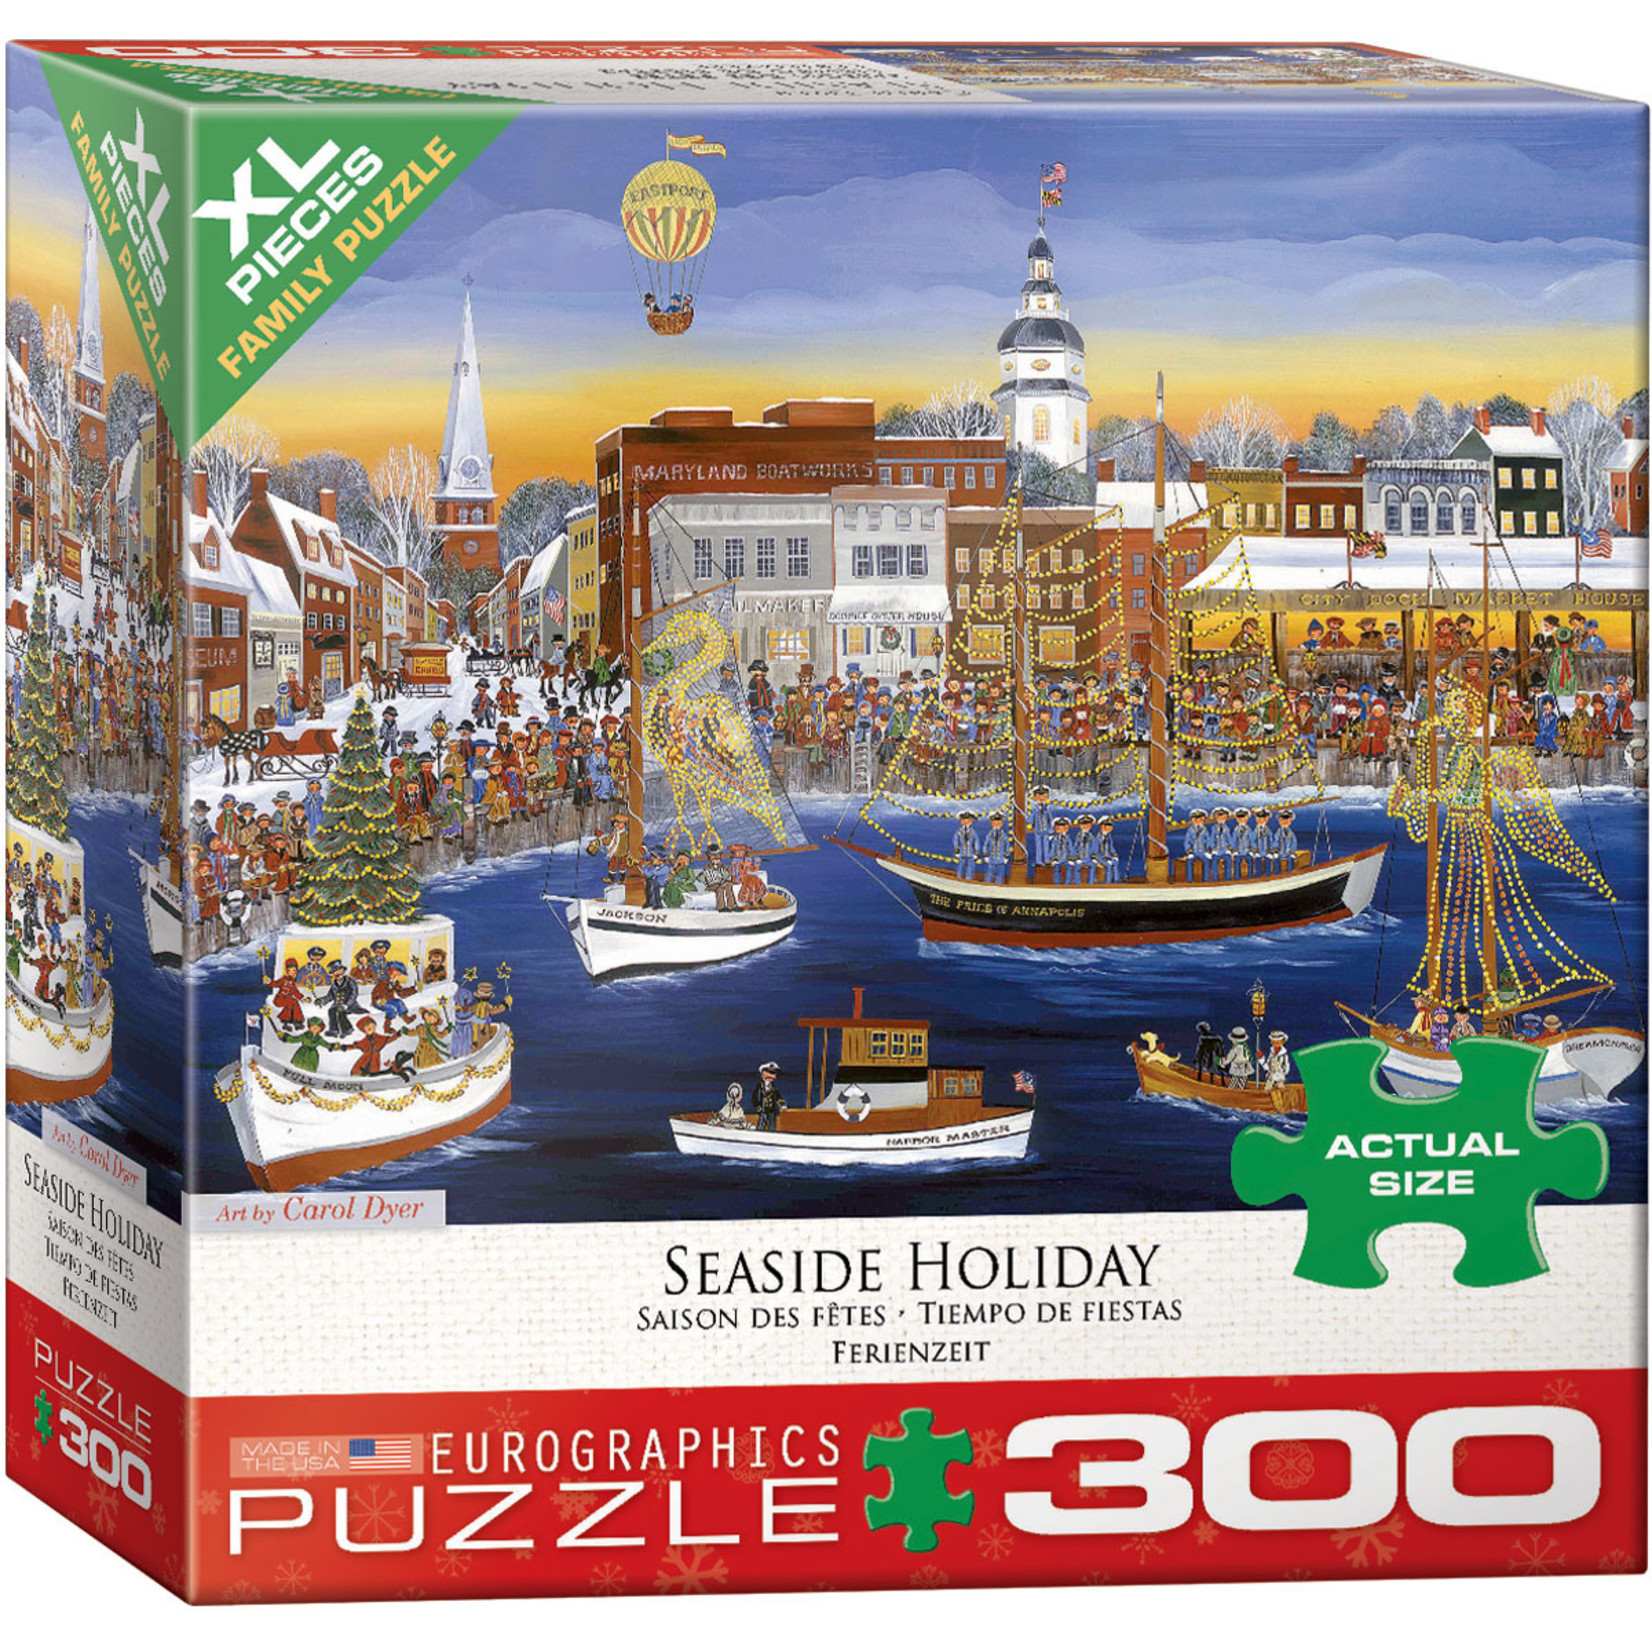 EuroGraphics Puzzles Seaside Holiday - C. Dyer (300pc)